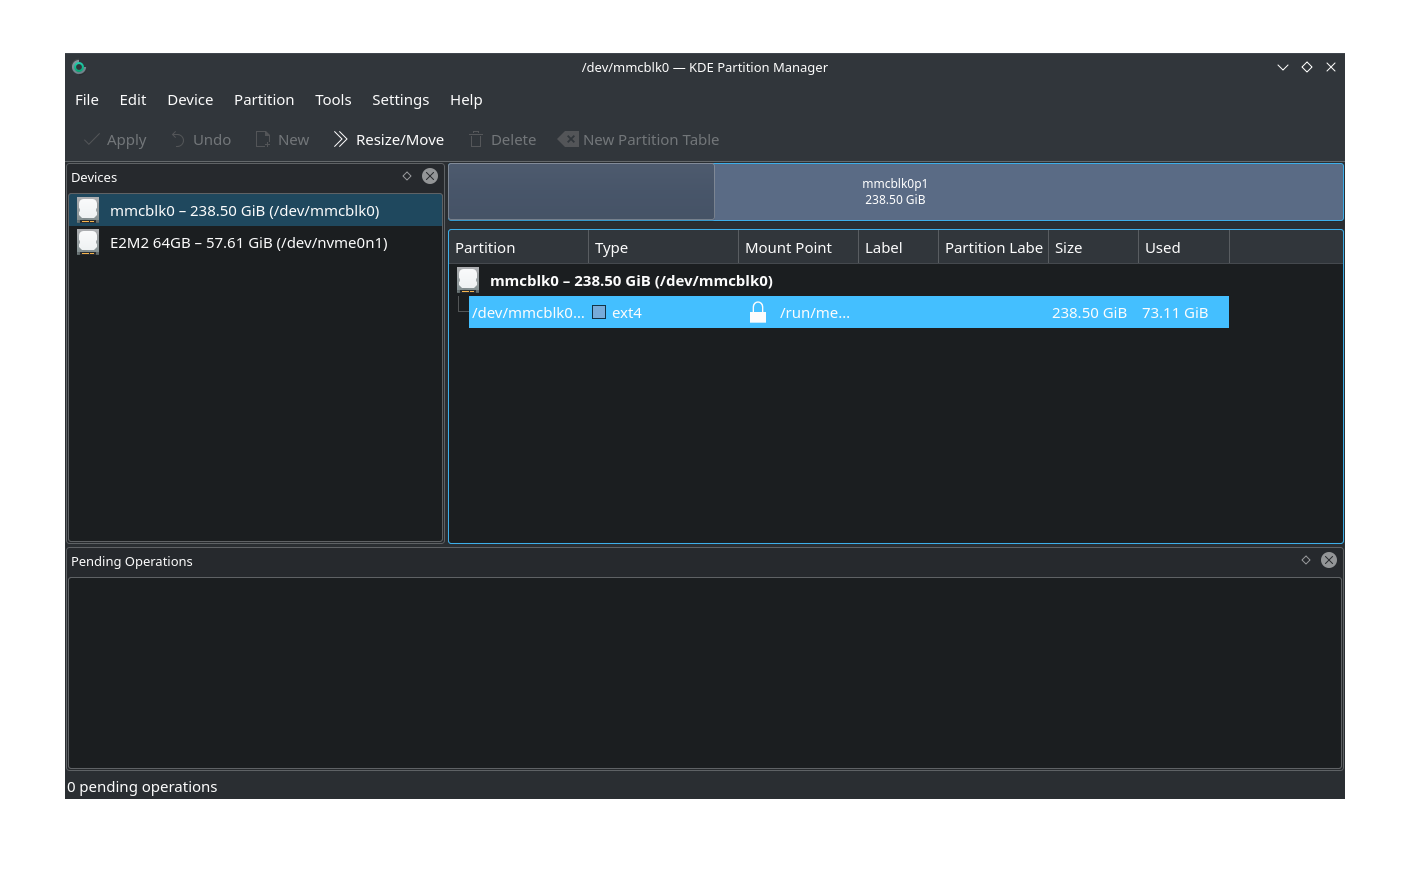 A screenshot within the KDE Partition Manager